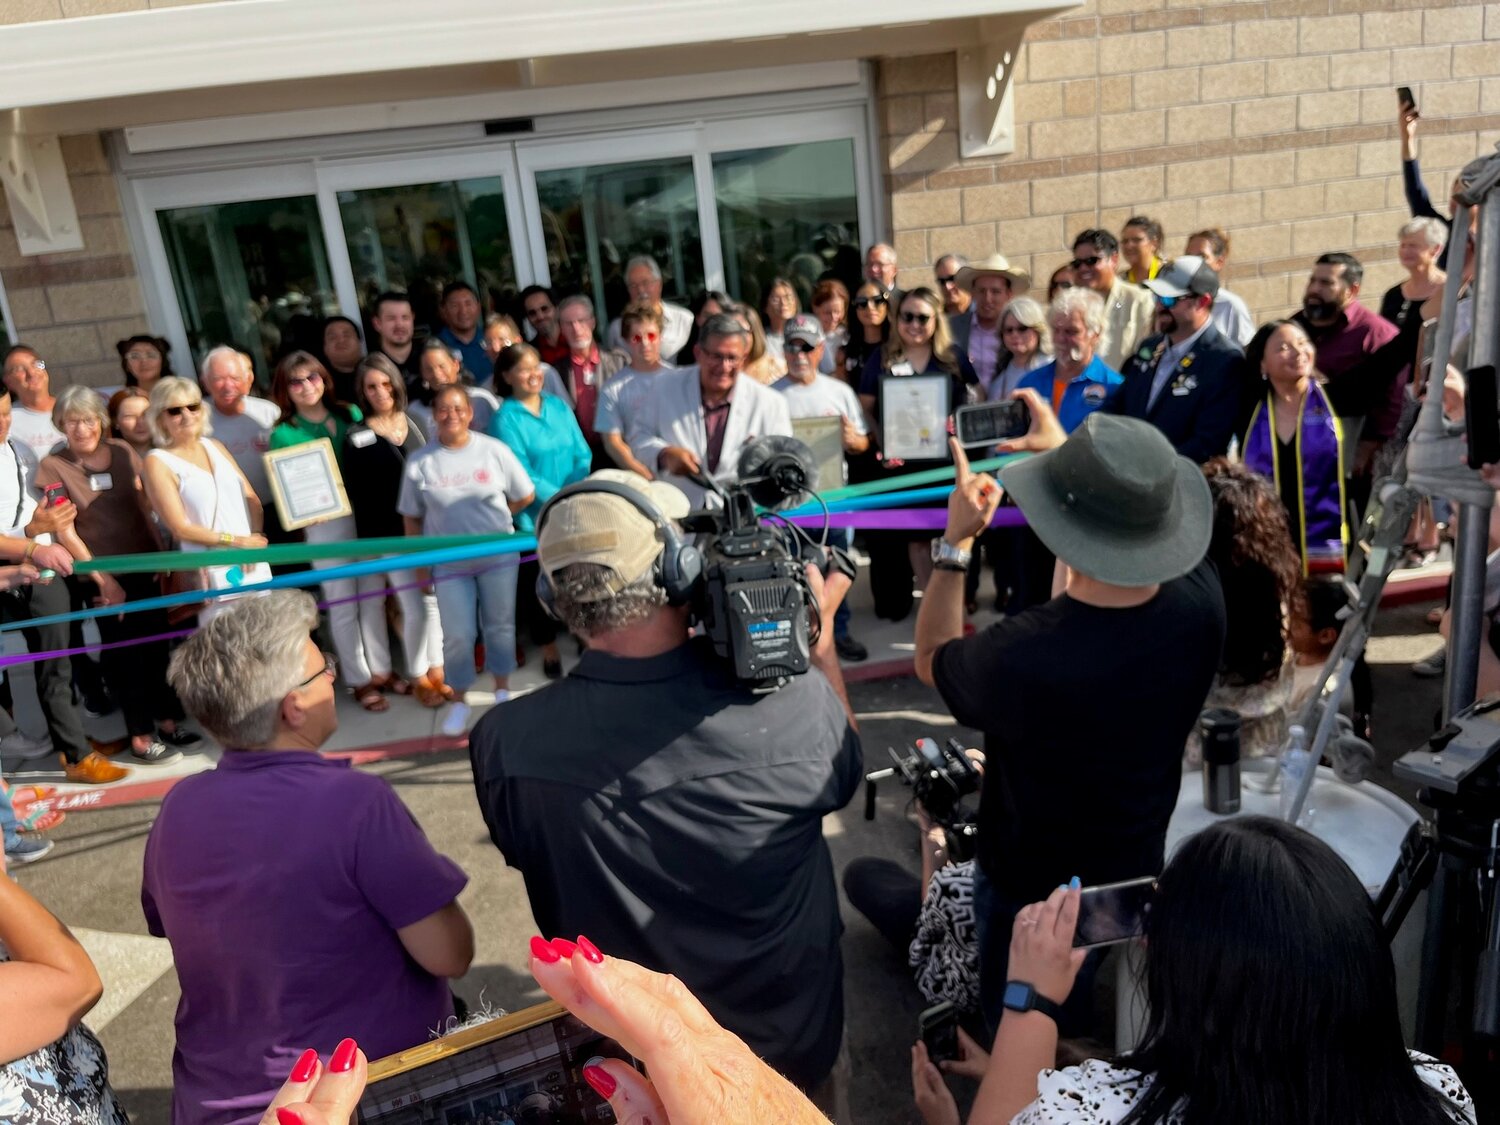 Lorenzo Alba Jr., executive director of Casa de Peregrinos, cuts the ribbon in front of dozens of cameras at the facility’s grand opening.